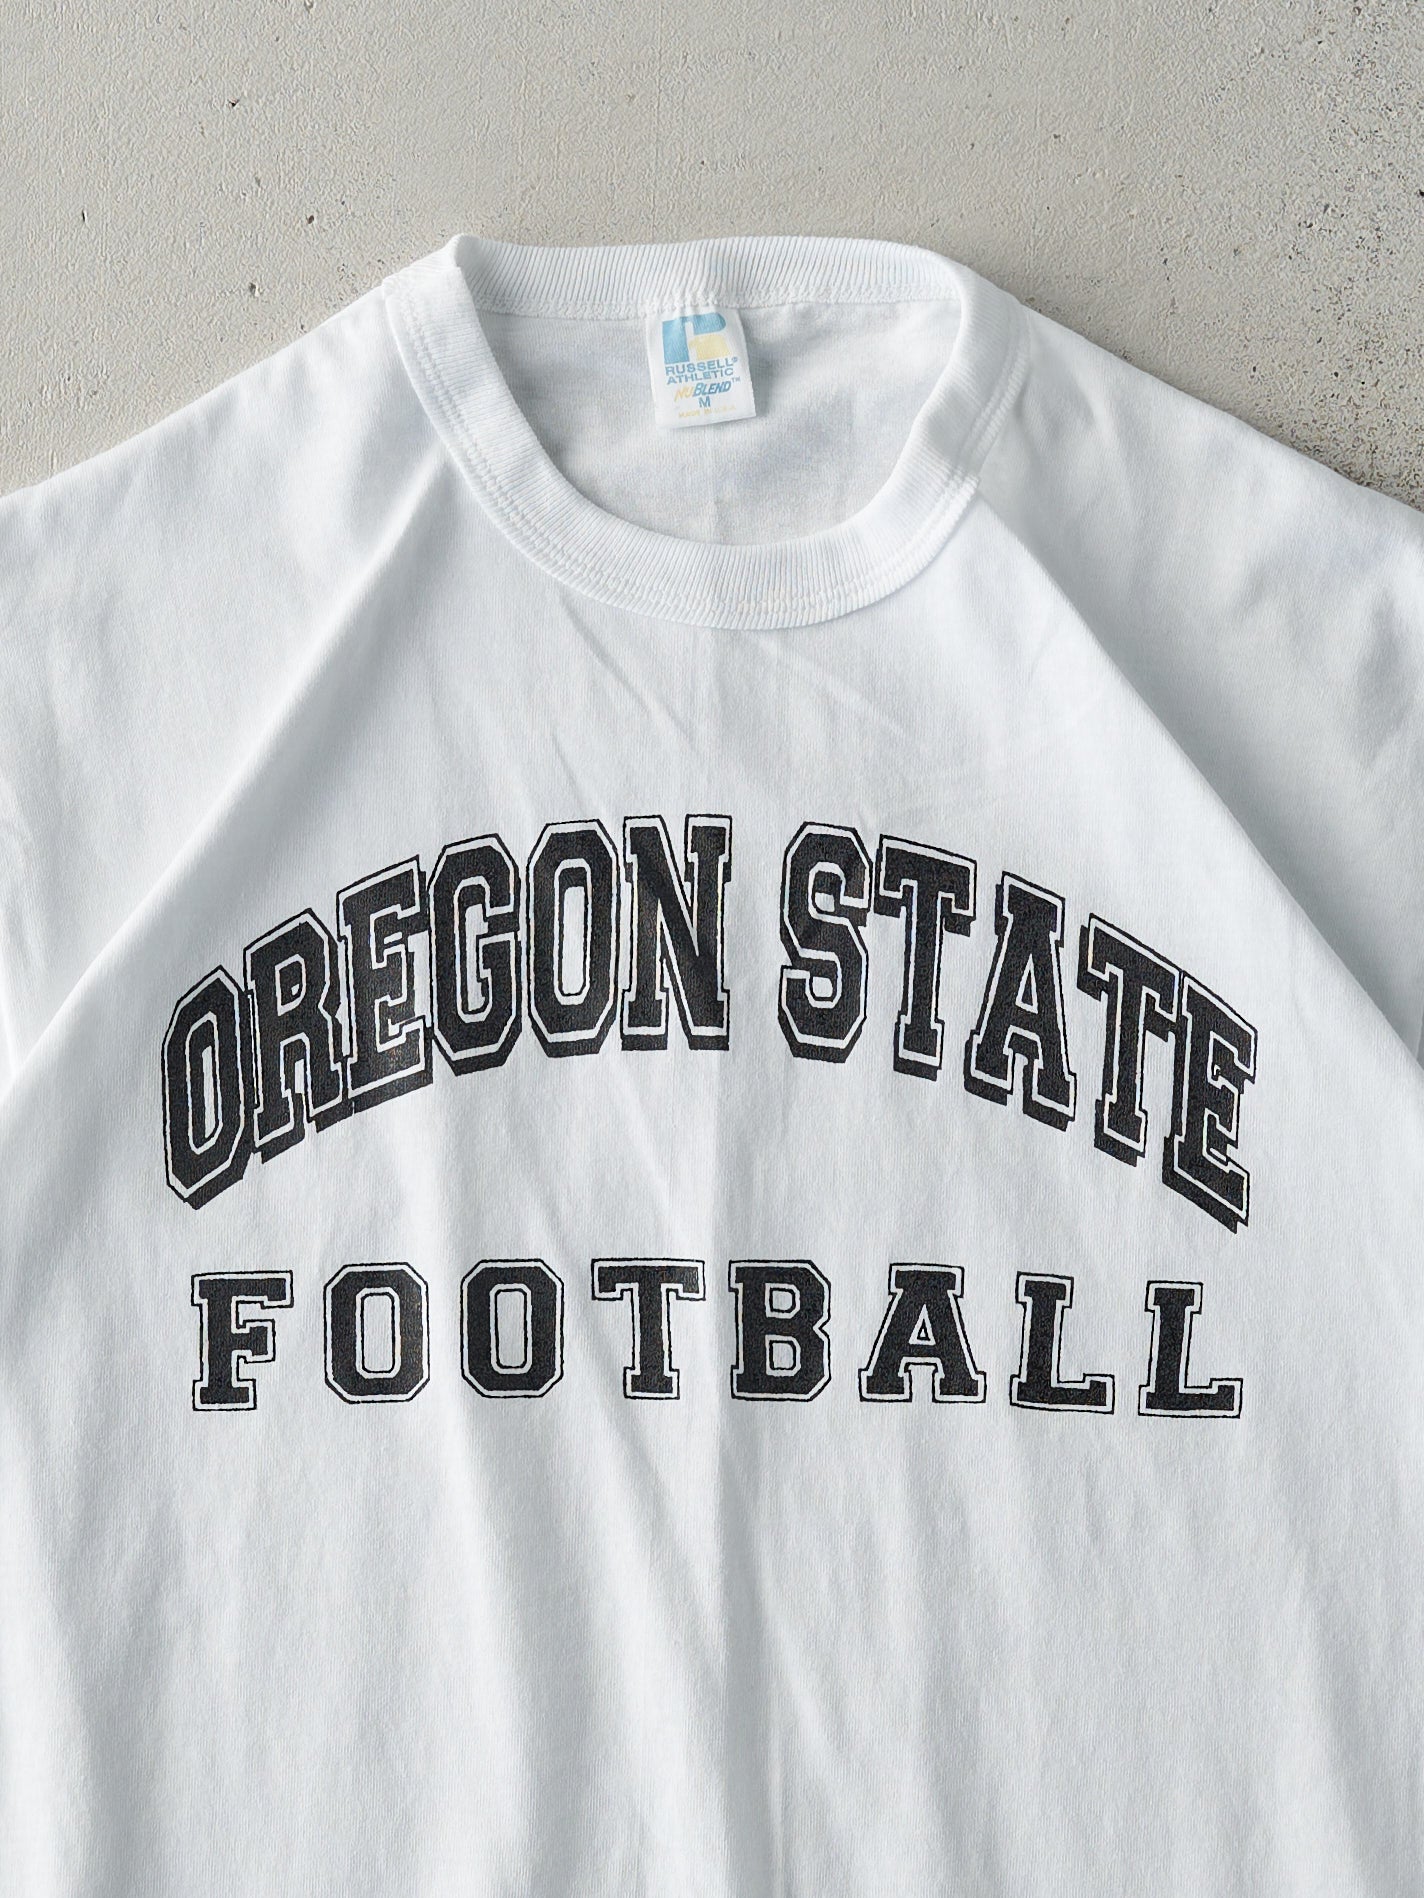 Vintage 90s White Oregon State Football Russell Athletic Tee (S/M)